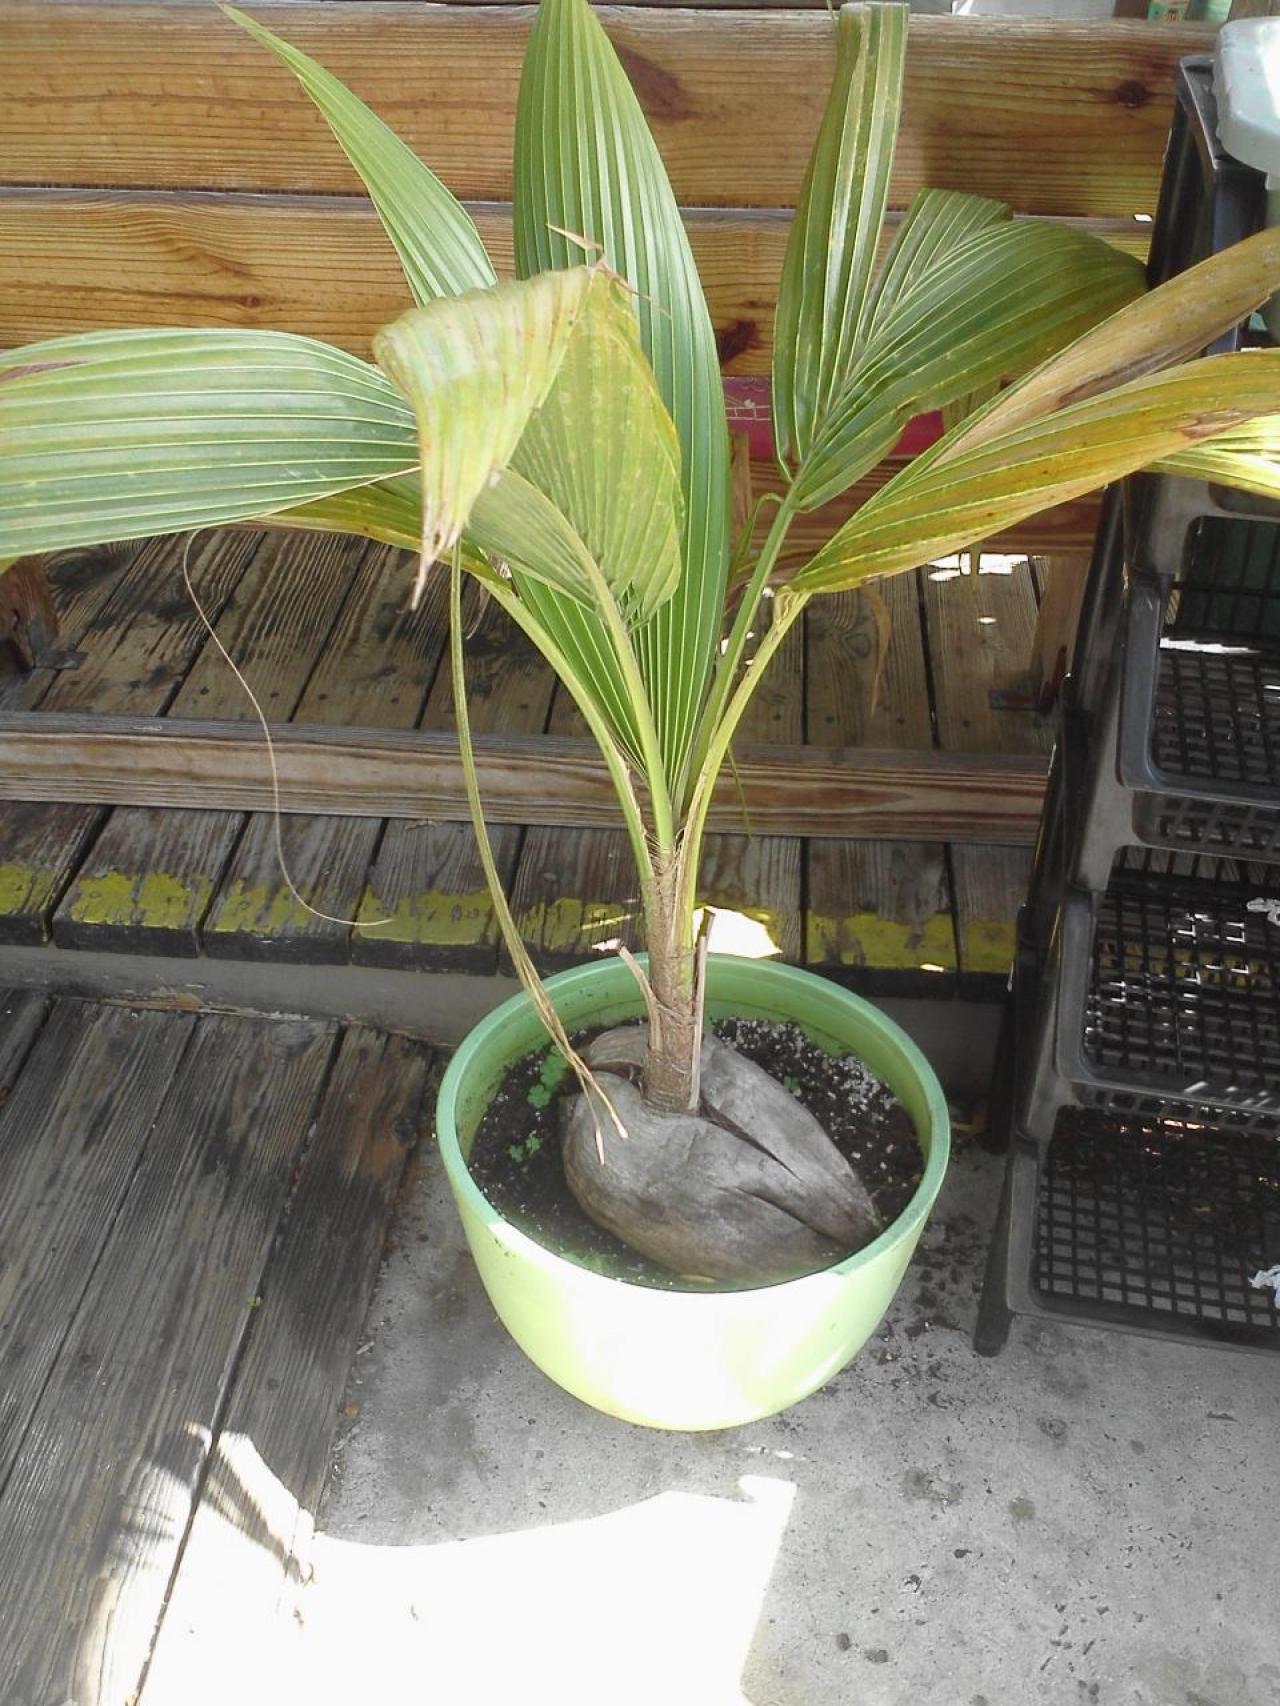 Pretty cool to see a baby coconut tree